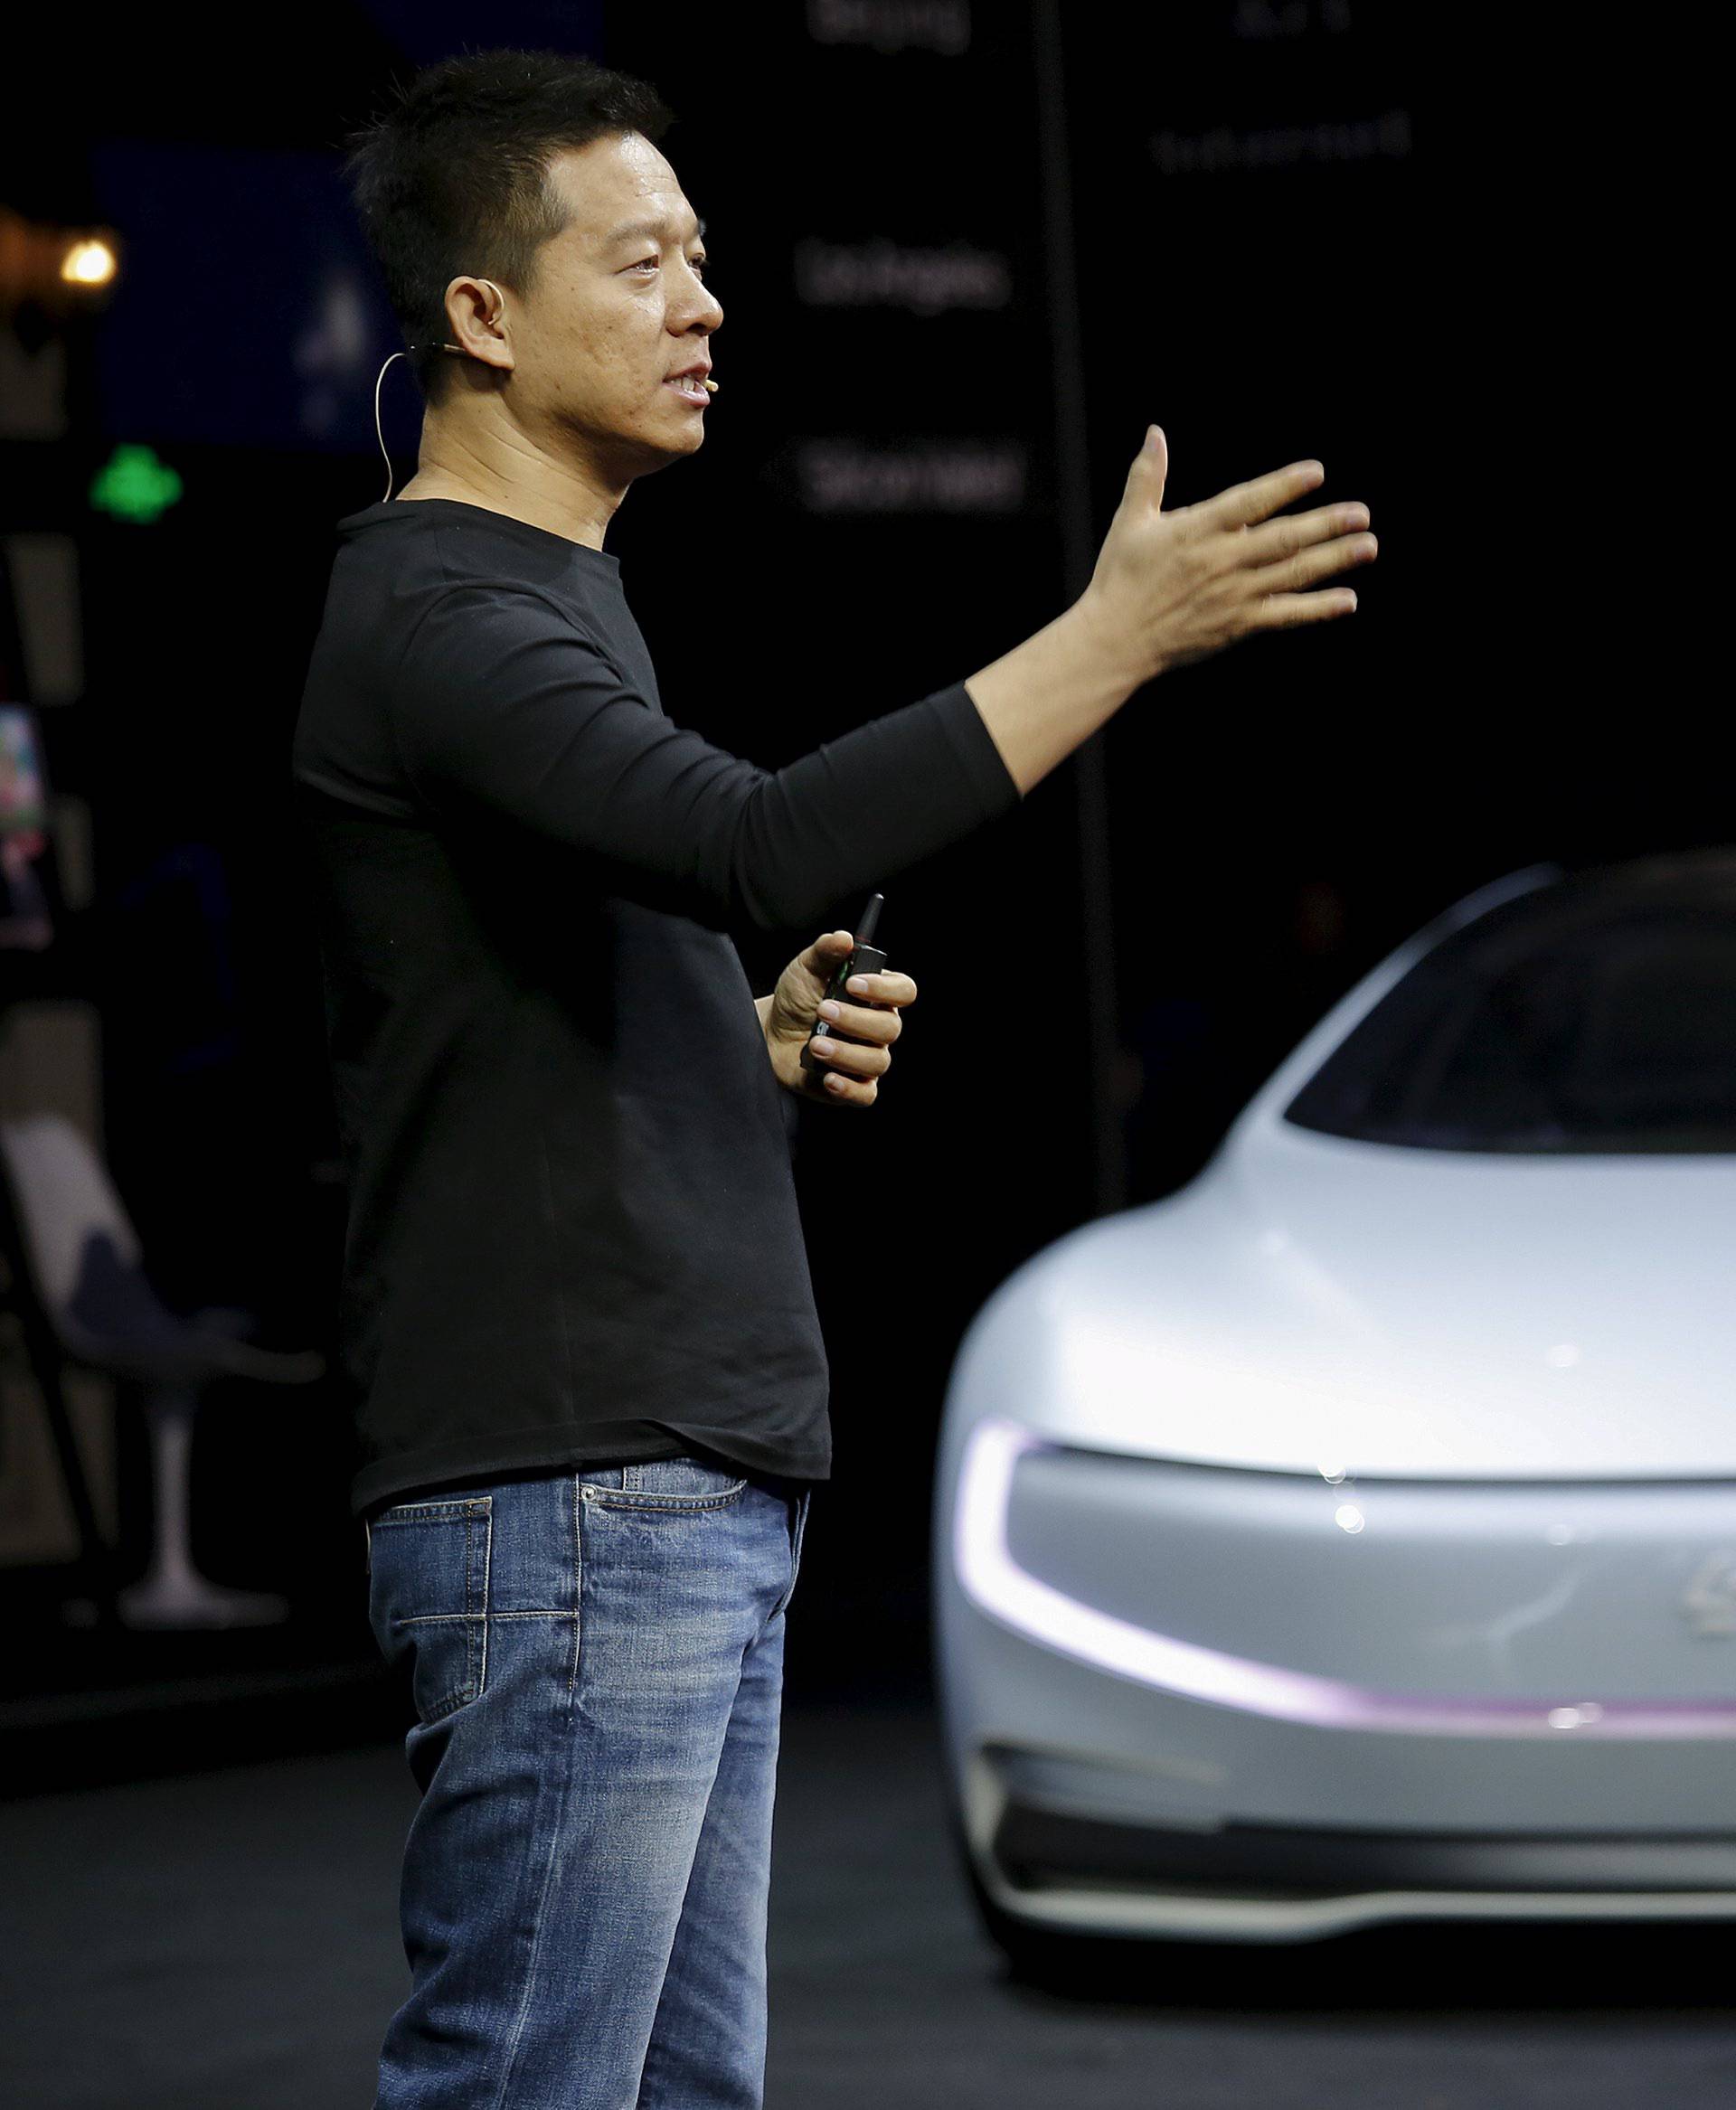 Jia, co-founder and head of Le Holdings Co Ltd, also known as LeEco and formerly as LeTV, gestures as he unveils an all-electric battery "concept" car called LeSEE during a ceremony in Beijing